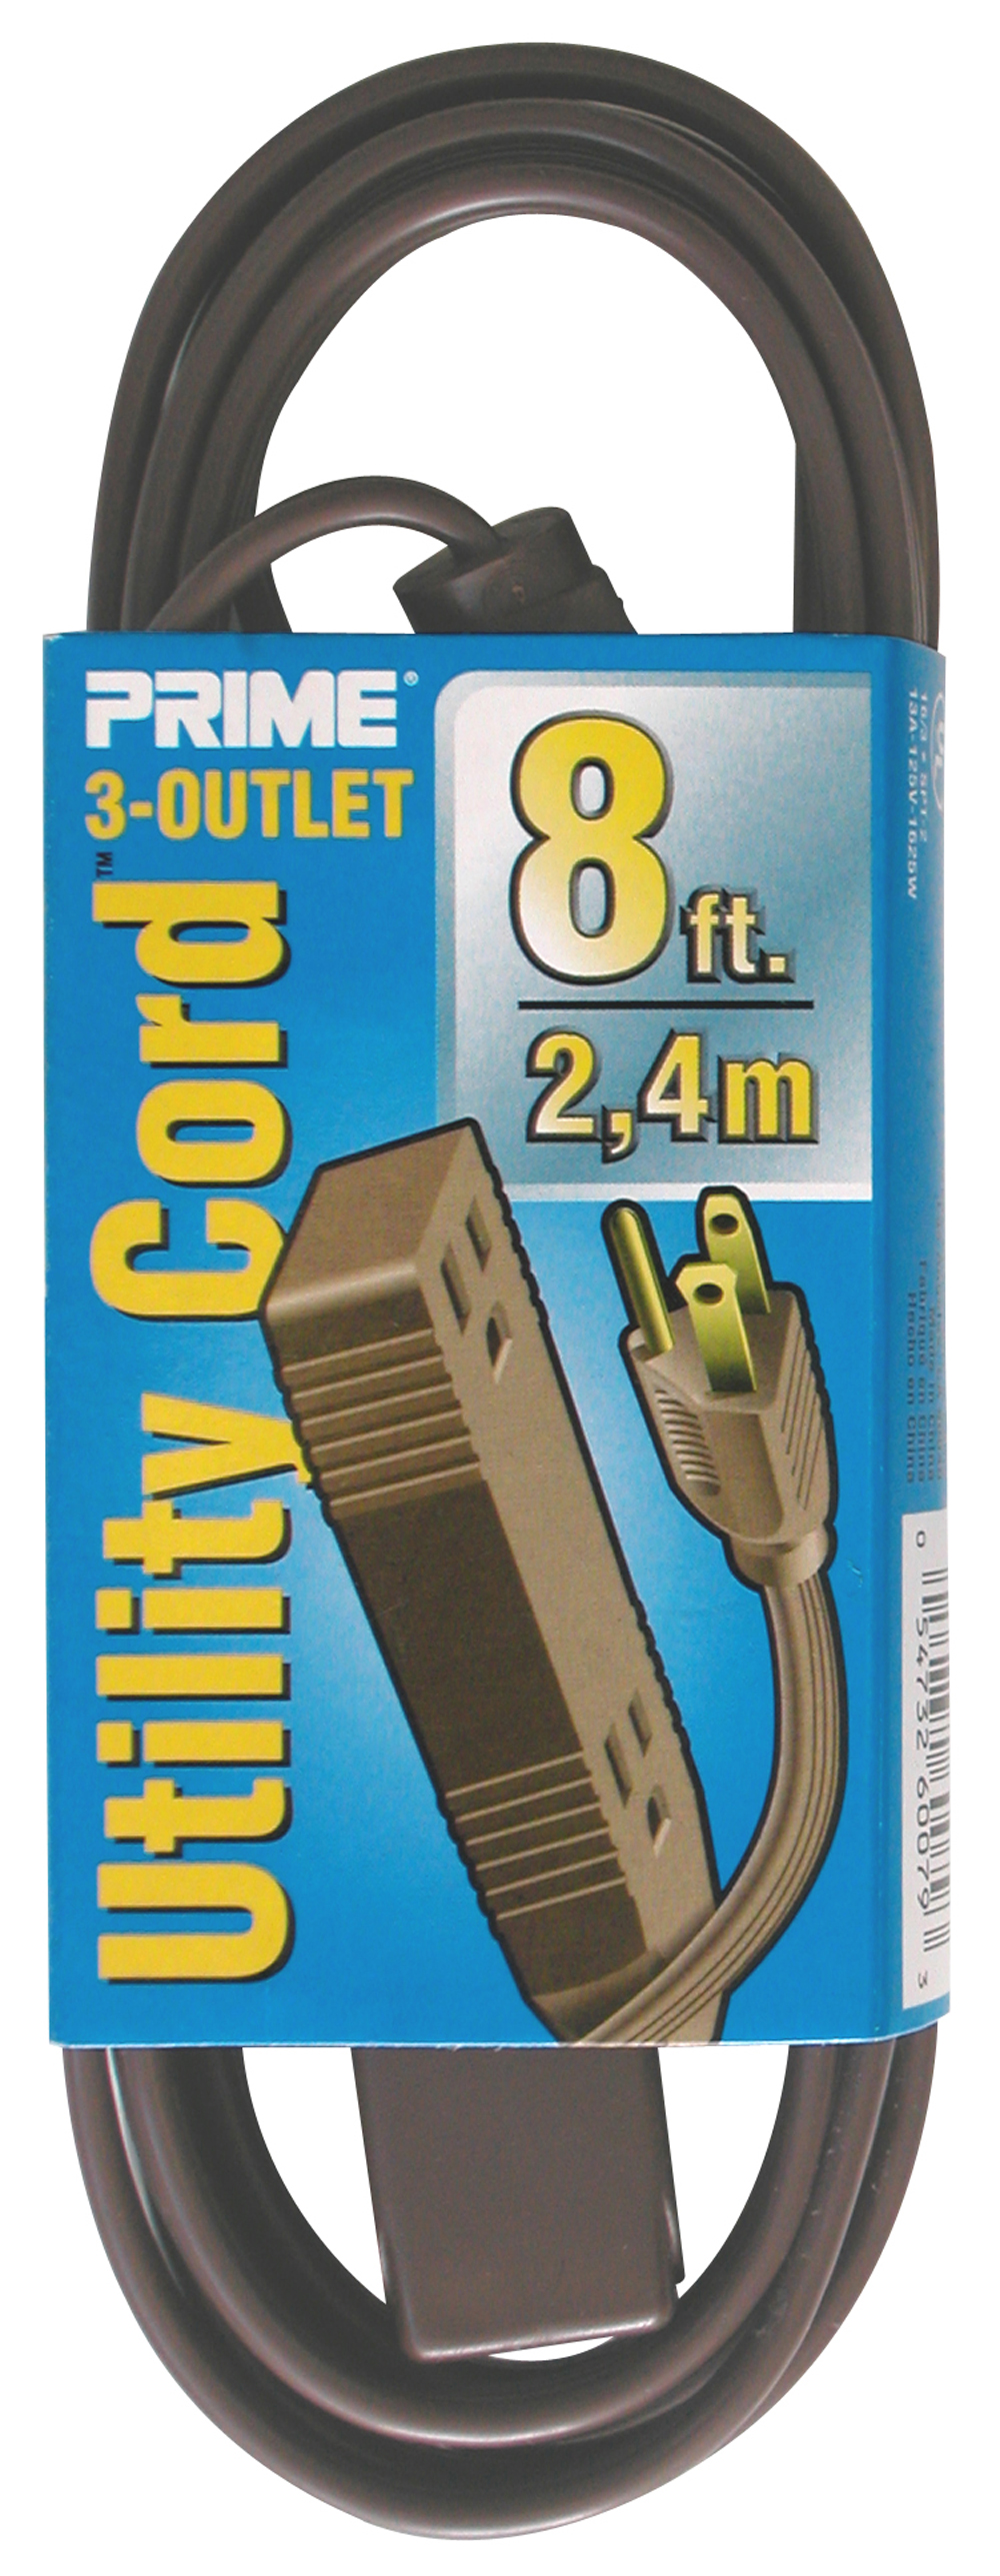 Prime Wire & Cable EC850608 8-Foot 16/3 SPT-2 3-Outlet Utility Indoor Cord, Brown